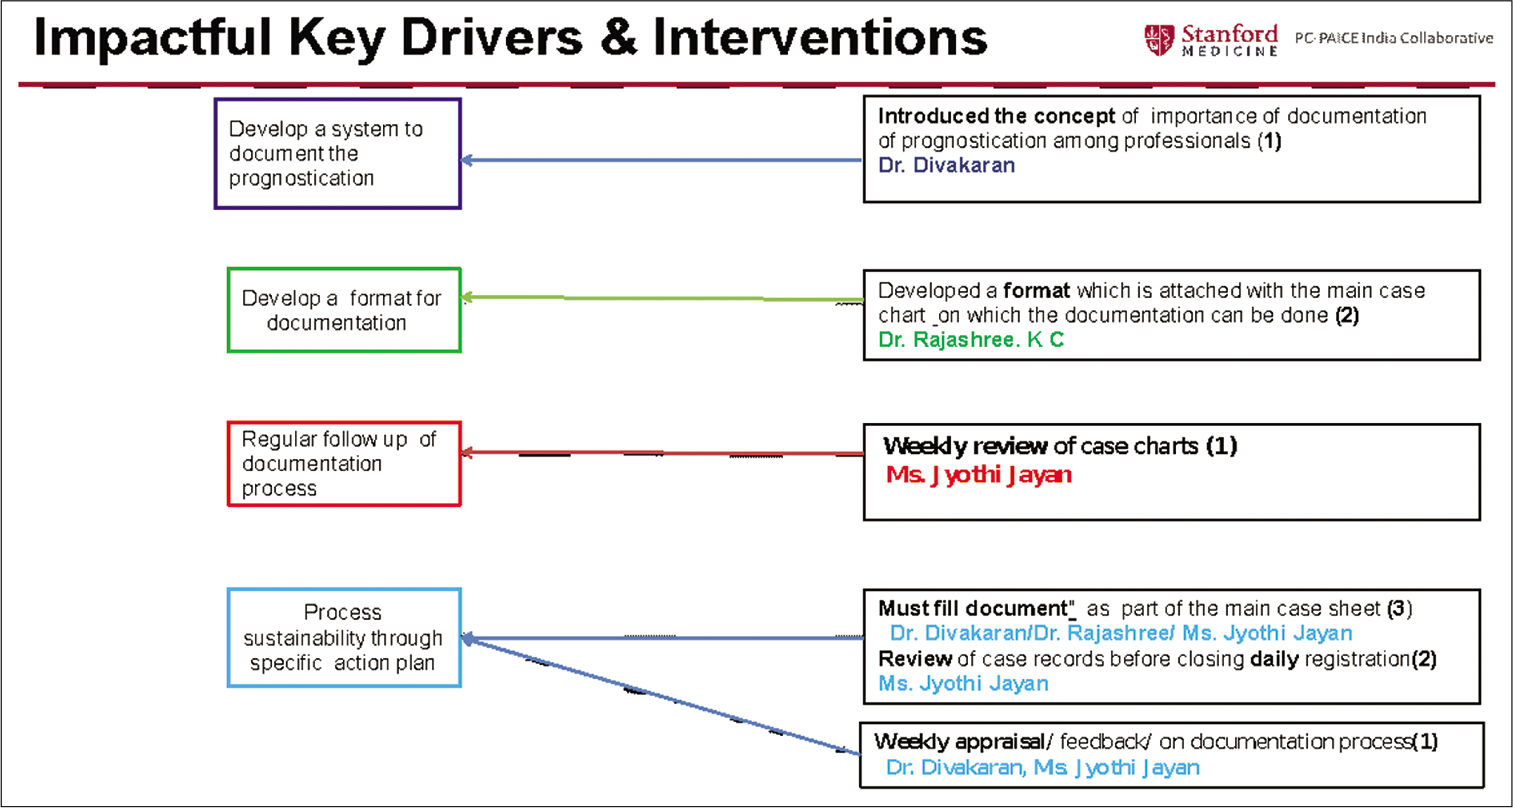 Impactful Key drivers and Interventions to achieve them with their Reliability Levels